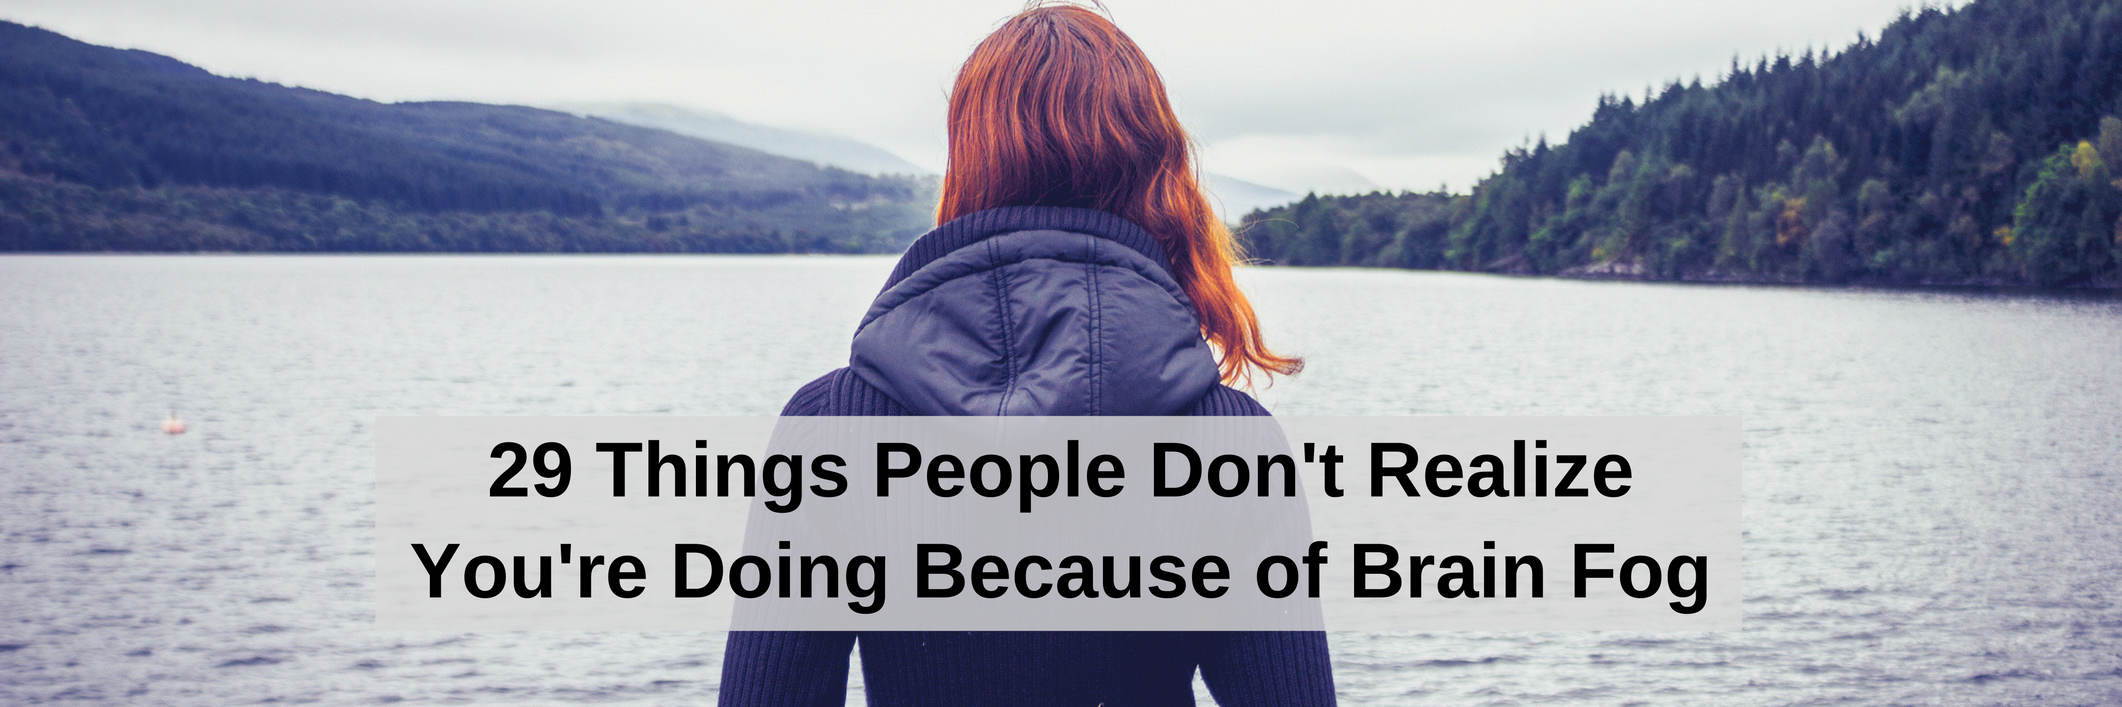 29 Things People Don't Realize You're Doing Because of Brain Fog